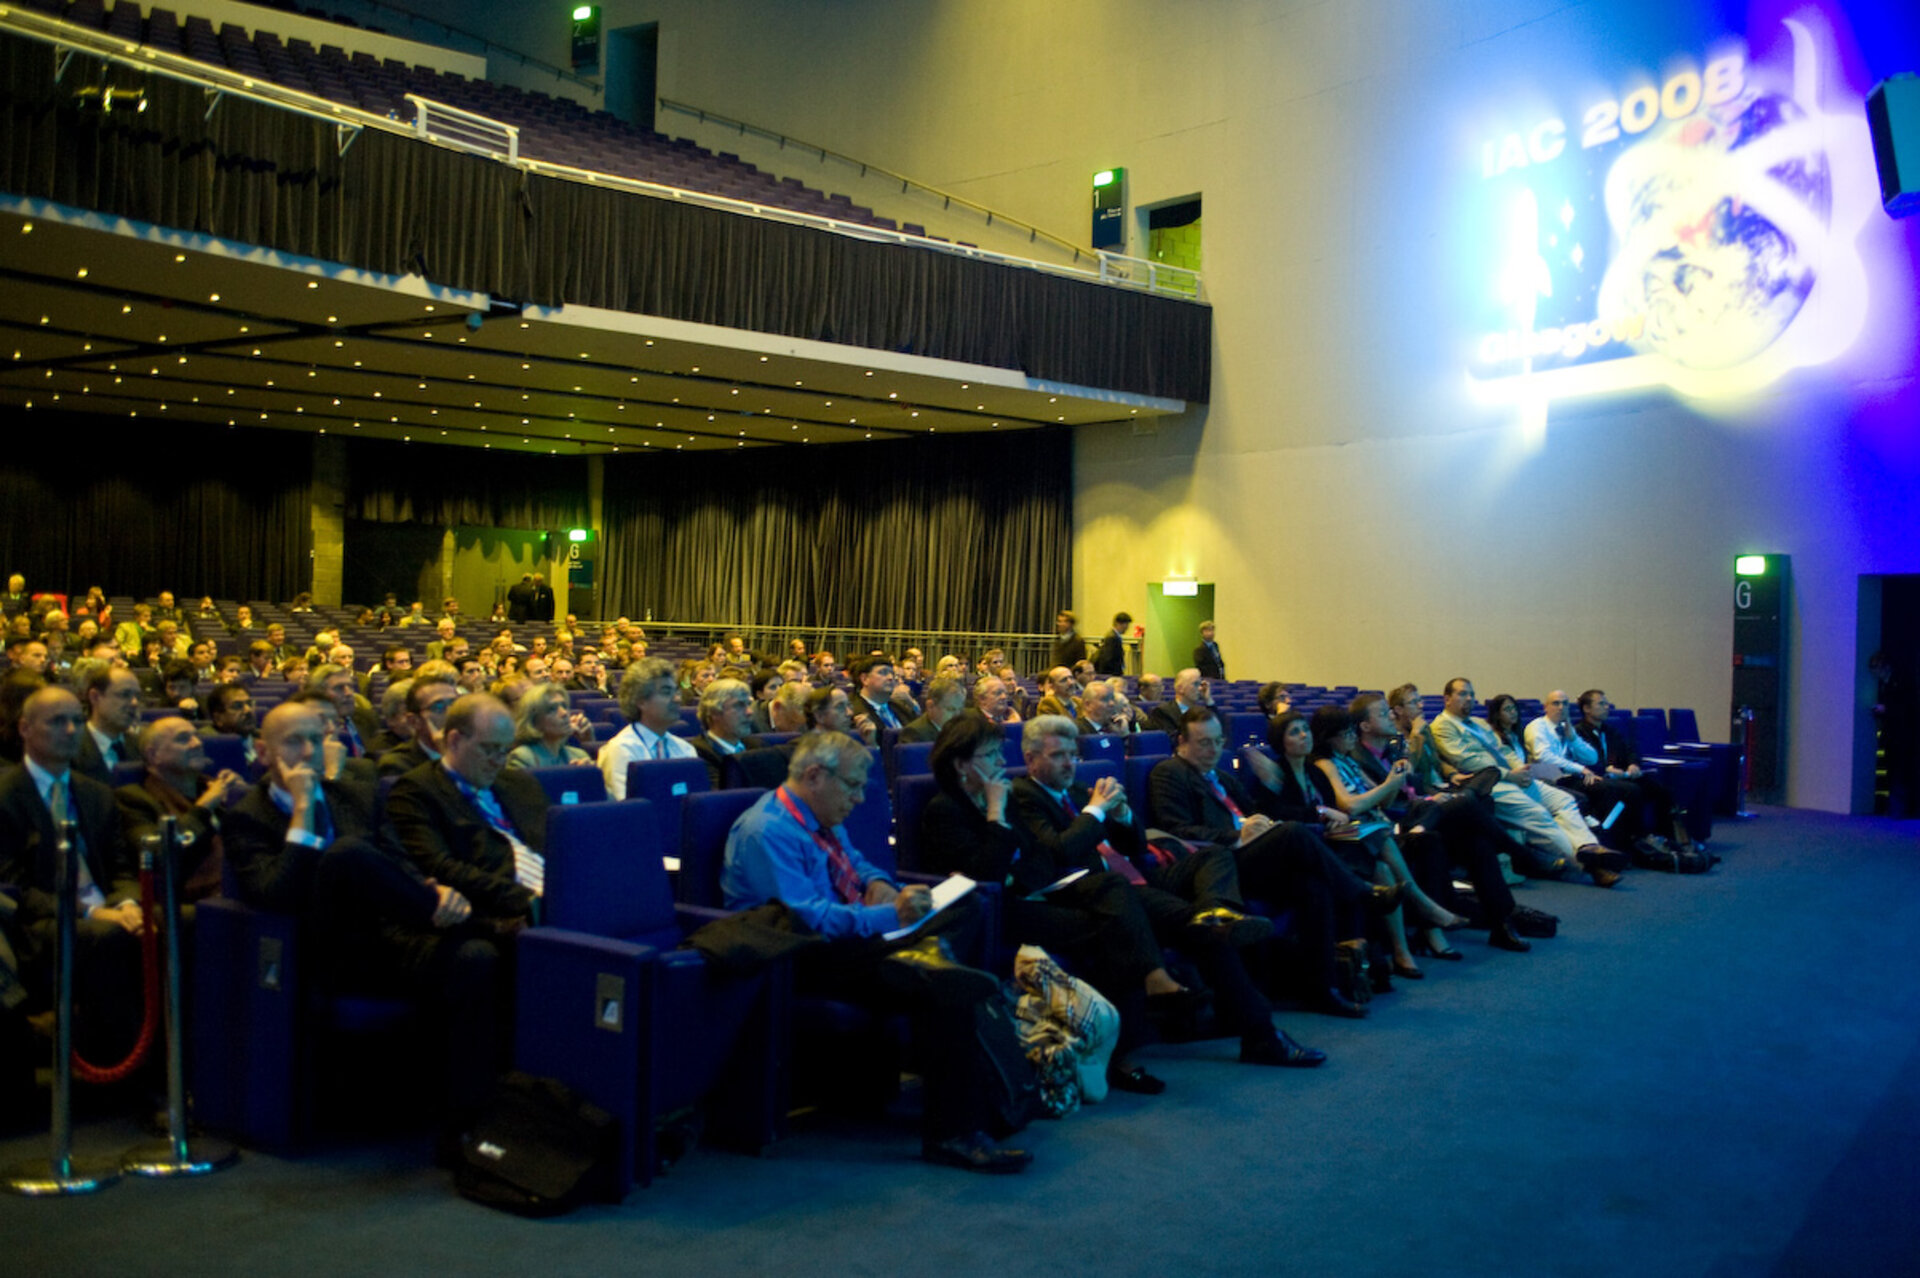 The auditorium for Jean-Jacques Dordain's highlight public lecture 'Celebrating the tenth anniversary of ISS' at IAC 2008